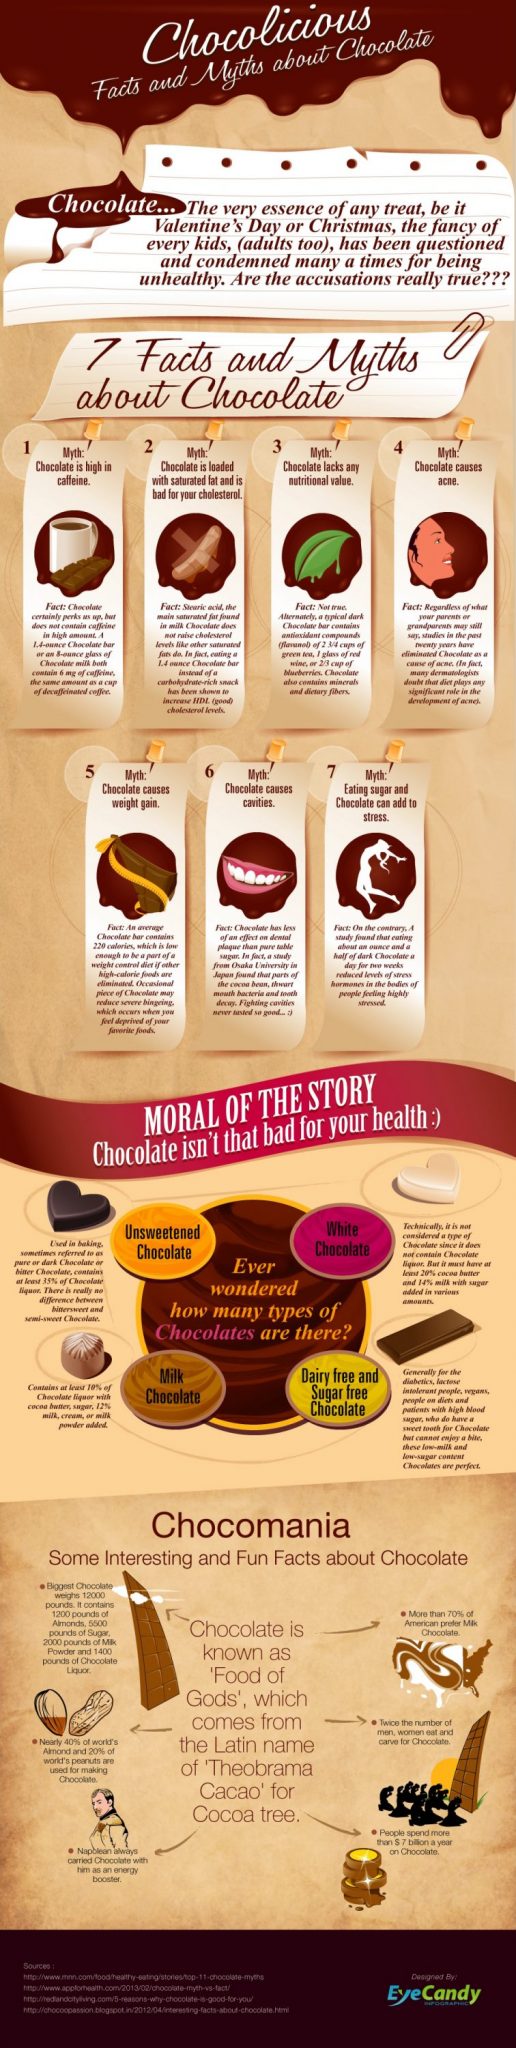 chocolicious-facts-and-myths-about-chocolate